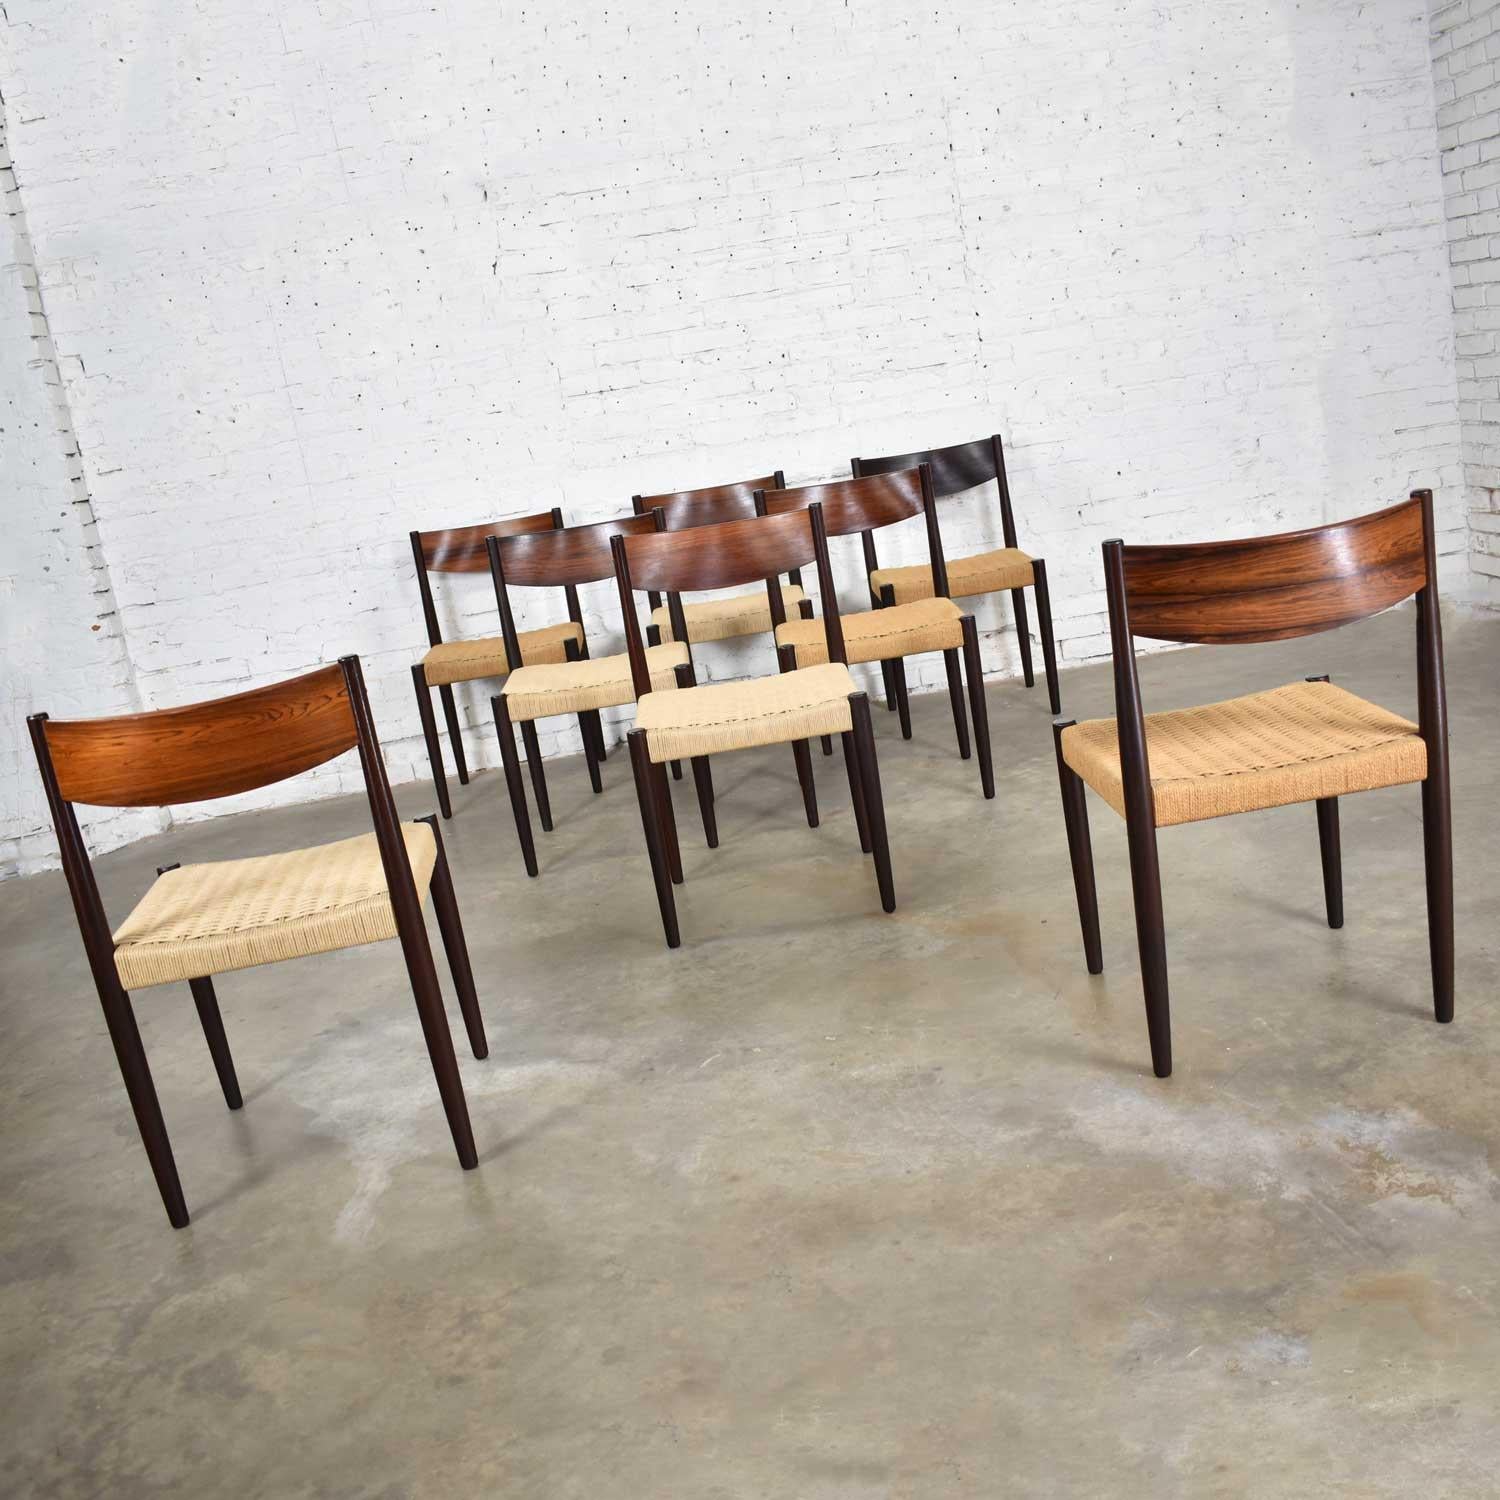 Poul Volther Scandinavian Modern Rosewood Paper Cord Dining Chairs by Frem Røjle 1